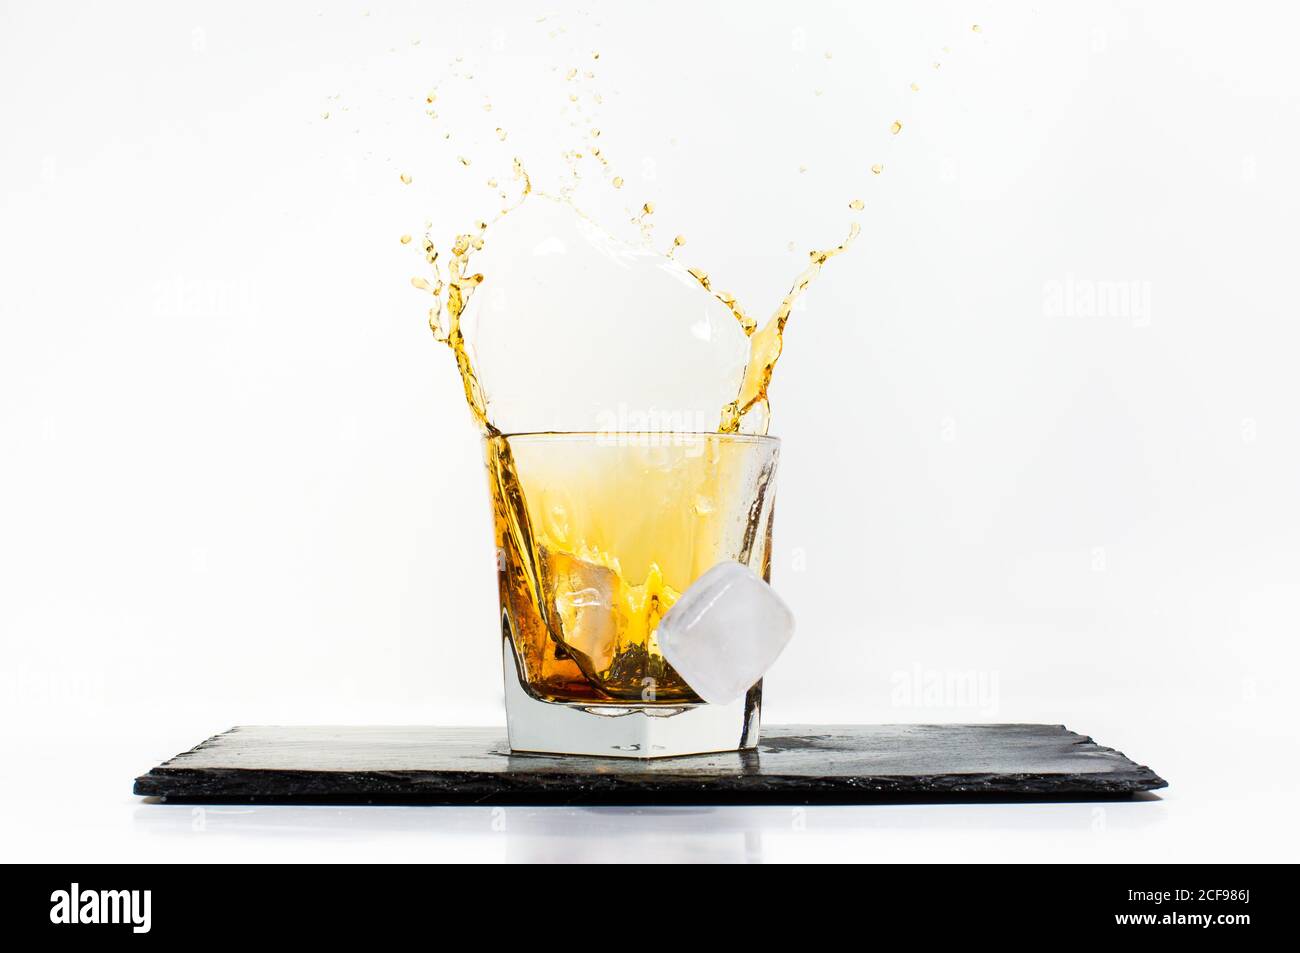 https://c8.alamy.com/comp/2CF986J/glass-of-yellow-cold-drink-with-falling-ice-cube-and-splashes-placed-on-black-slate-board-on-white-background-2CF986J.jpg